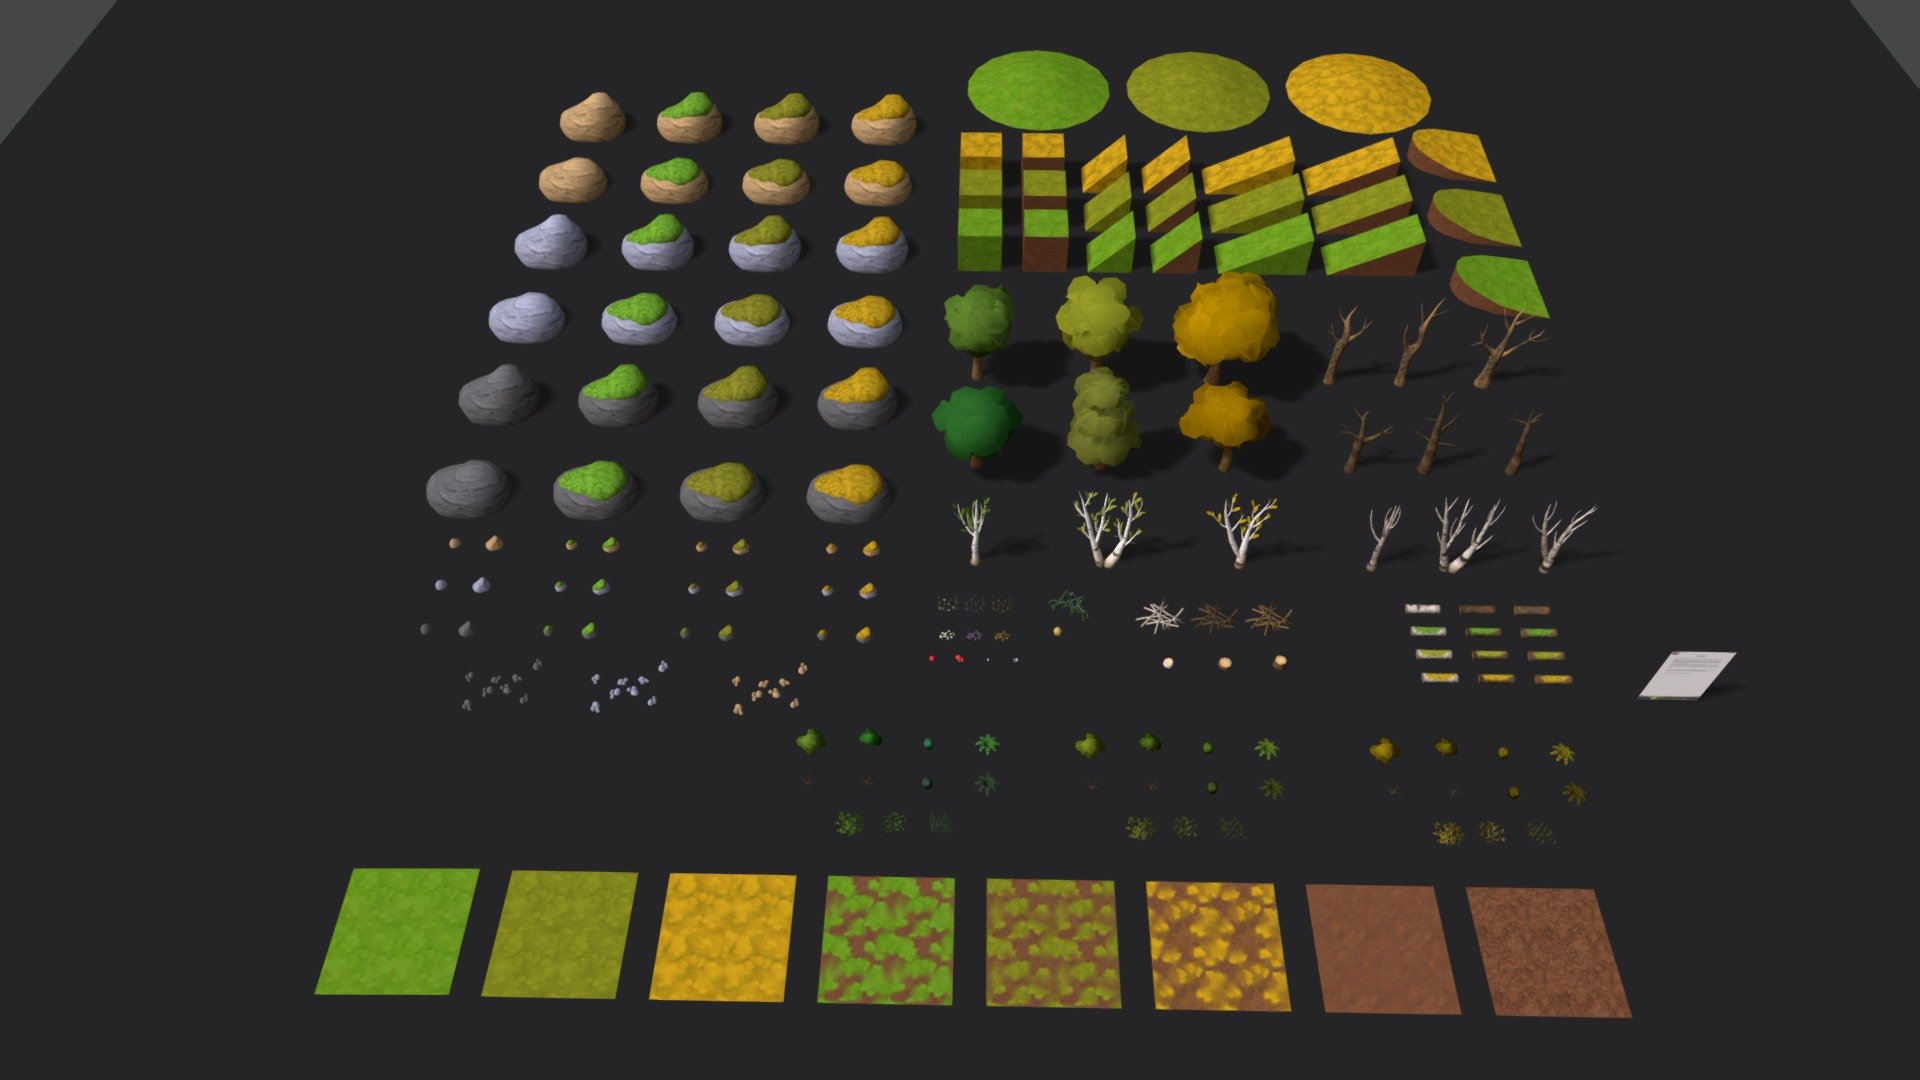 This package allows you to build different forests

OPTIMIZED MOBILE (LOD for trees)


Textures



15 Atlases of textures : Atlas_Forest_1 + Atlas_Forest_2 (2048-2048 px), Atlas_Rocks (1024-1024 px) in 3 colors. 3 variants in green, mustard, yellow for all

8 Tileable textures in 512px


Package contains 88 meshes
Props




1 Hive, 3 Pile of branches (beech, birch, oak), 3 TreeStump (beech, birch, oak), 3 TreeTrunk (beech, birch, oak), 3 TreeTrunk_Moss (beech, birch, oak).

Rocks




RockBig_A and RockBig_B, RockBig_A_Moss and RockBig_B_Moss, RockLittle_A , RockLittle_A_Moss, RockLittle_B, RockLittle_B_Moss, RockLittle_C_GRP. 

Trees




3 Beeches, 3 Birches, 3 Oaks, 3 Dead Beeches, 3 Dead Birches, 3 Dead Oaks.

Vegetation




1 Brambles, 3 bushes, 3 Dead Bushes, 1 Fern, 1 Dead Fern, 6 groups of flowers, 4 Mushrooms, 3 Grass.

License included in texture  for clarity - Handpainted Forest Mobile - Buy Royalty Free 3D model by Taryne-Aly 3d model